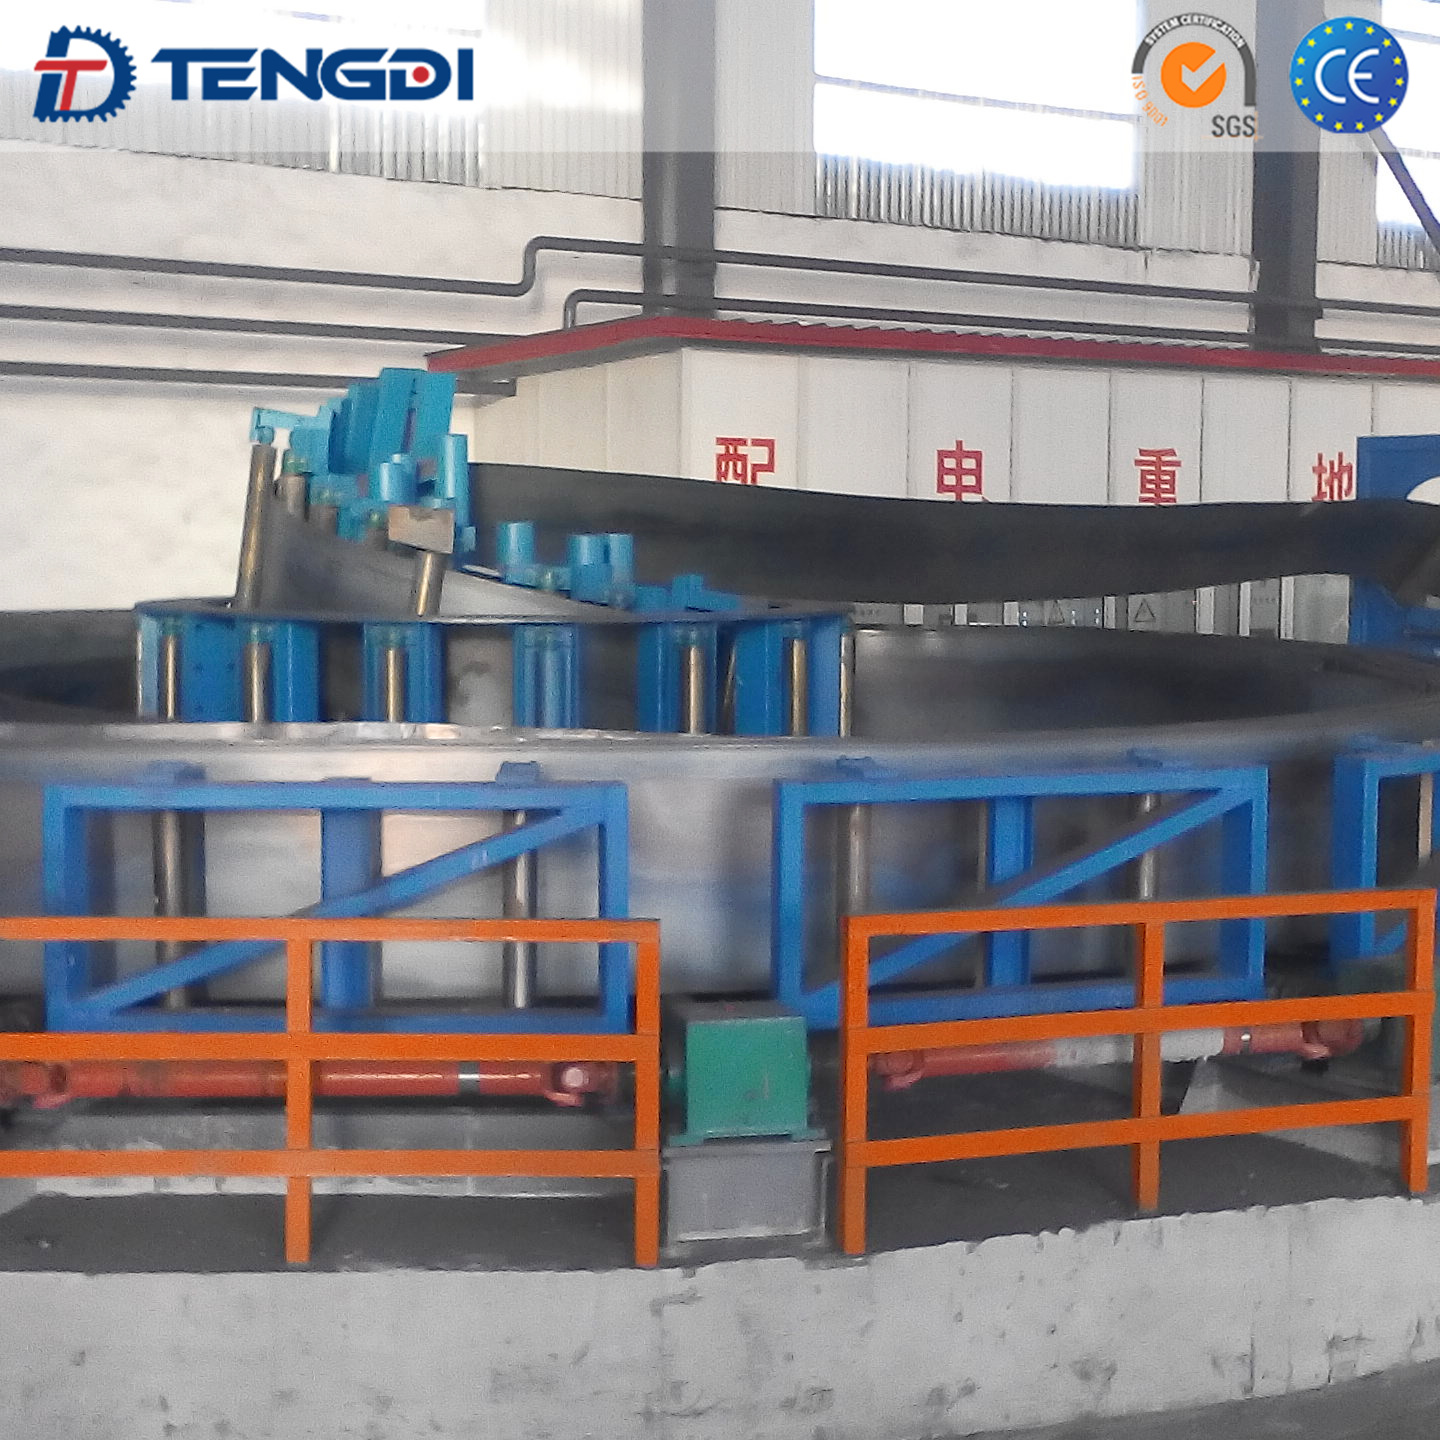 Cost-Effective Hg219 High Frequency ERW Steel Tube Mill/ Tube Mill Machine/High Frequency Welding ERW Steel Tube Mill/Pipe Machine/Pipe Macking Machine/